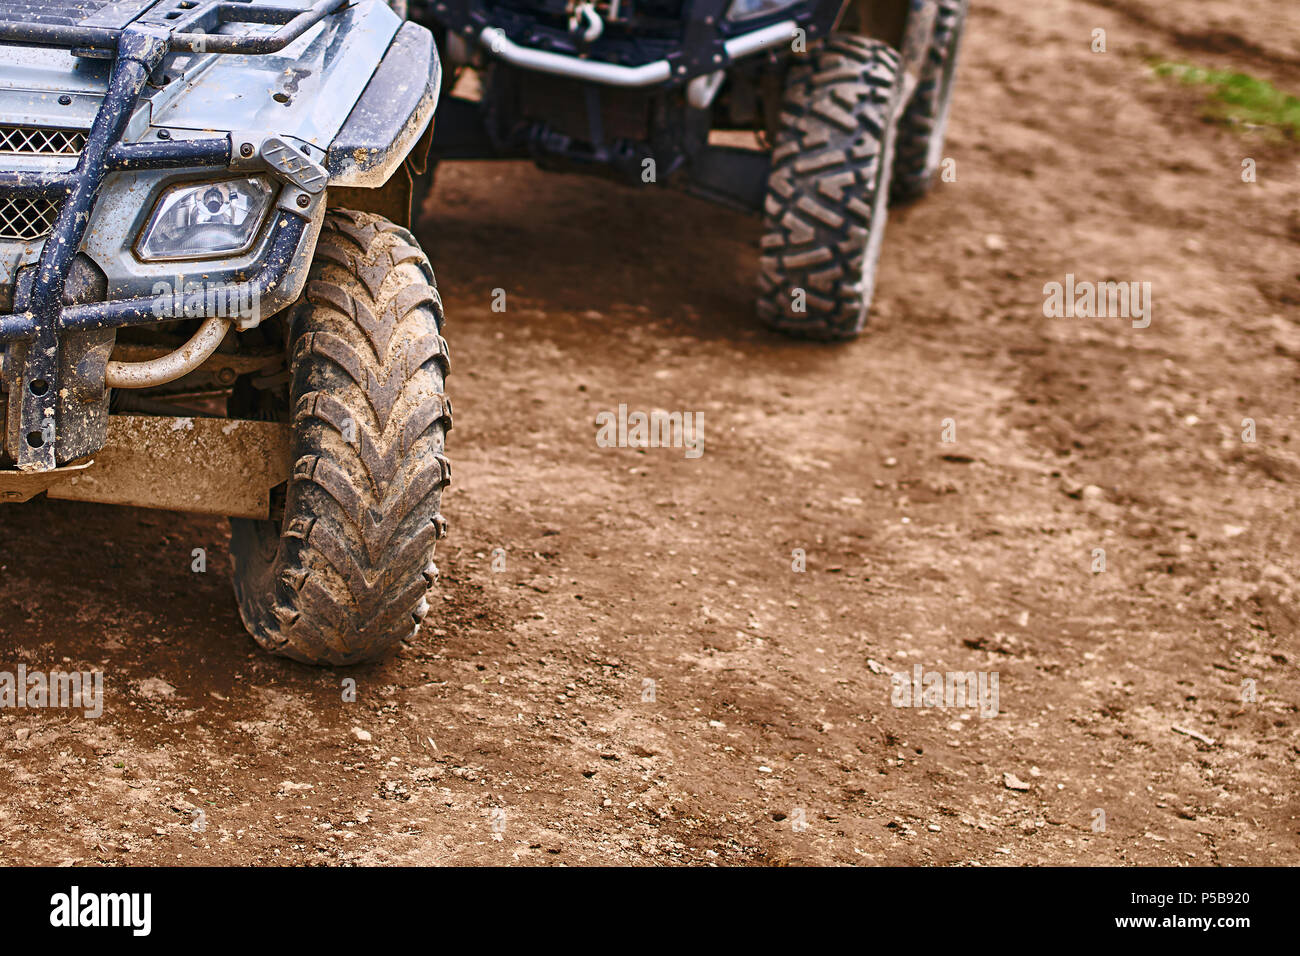 Quadricycles or quadbikes in the summer mountains Stock Photo